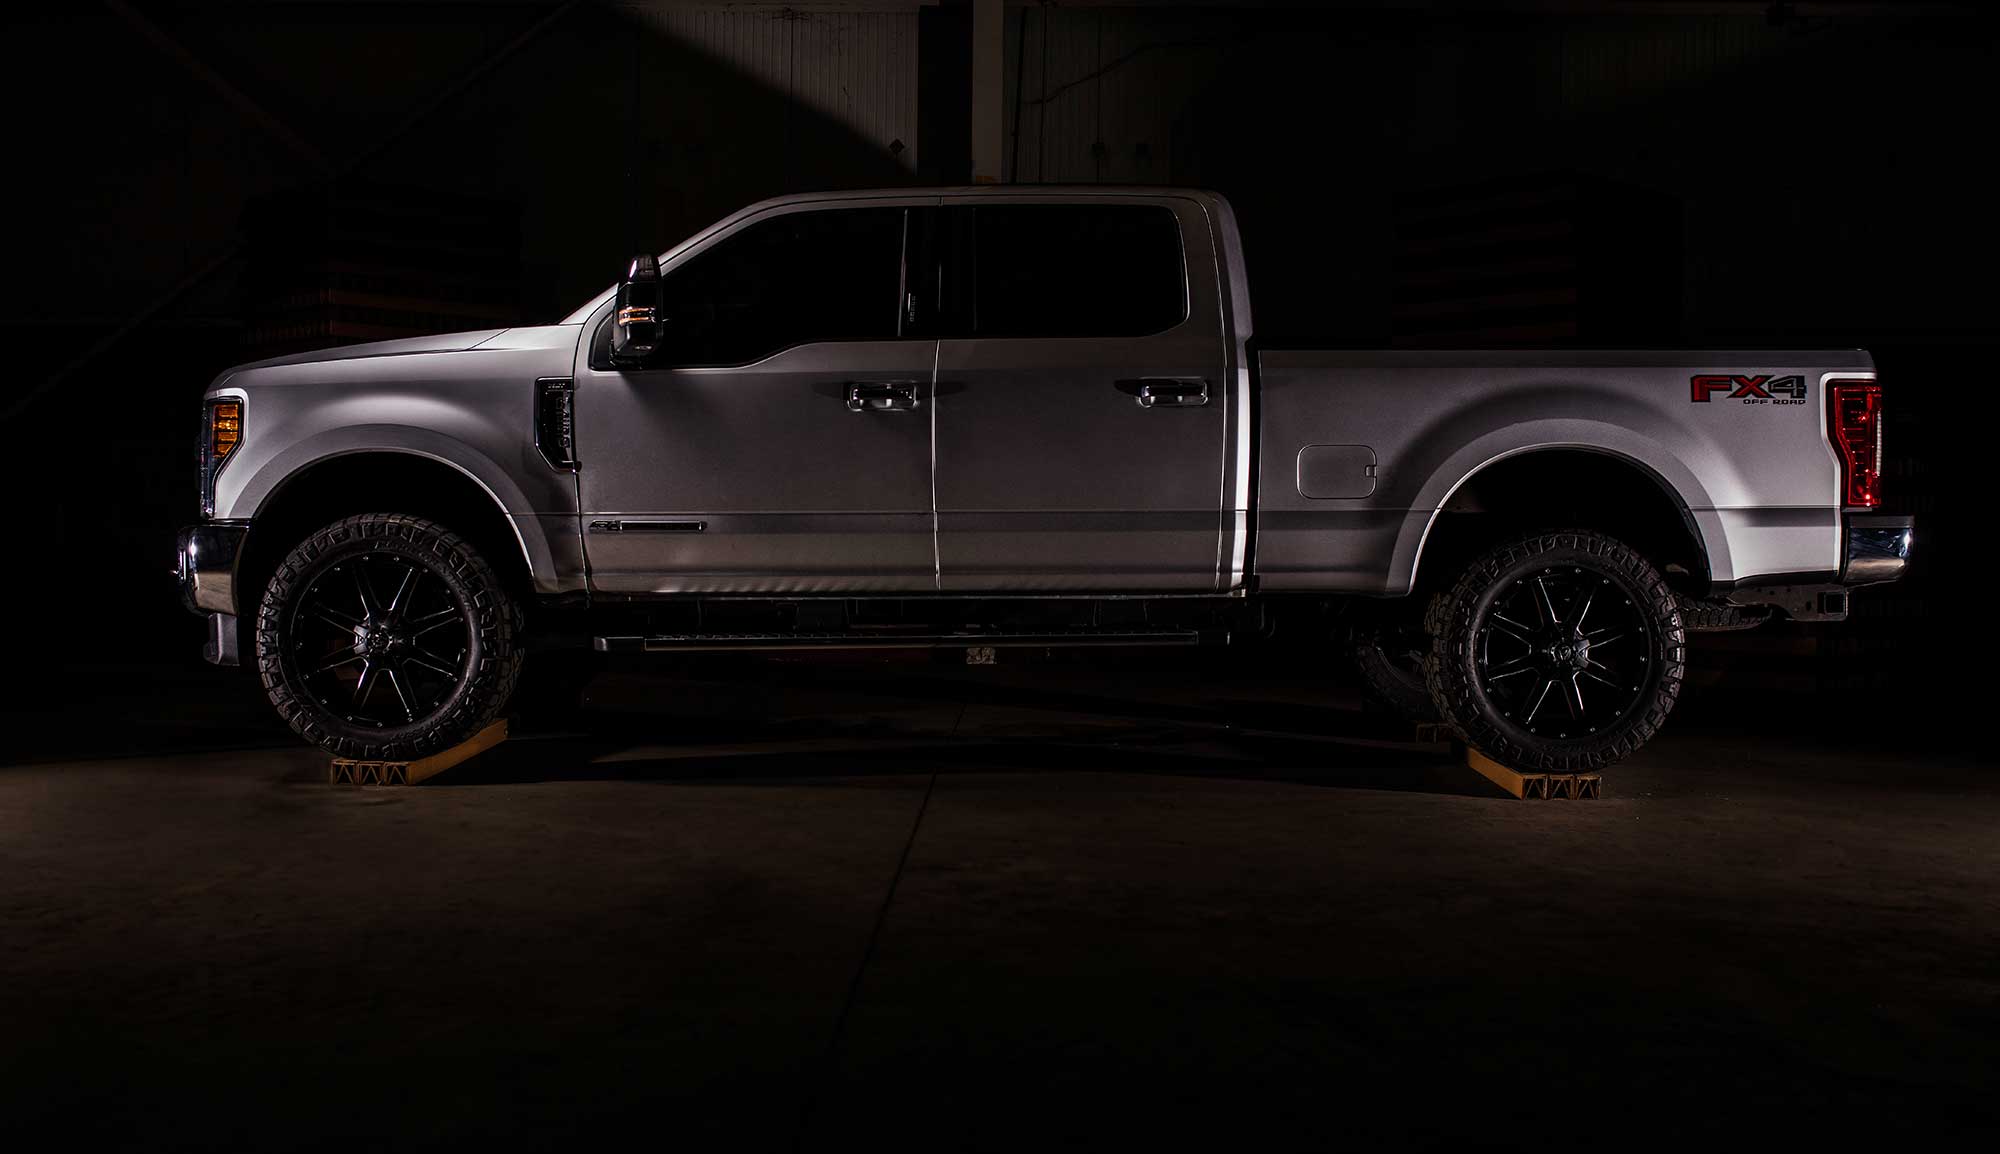 pickup truck photograph with moody lighting